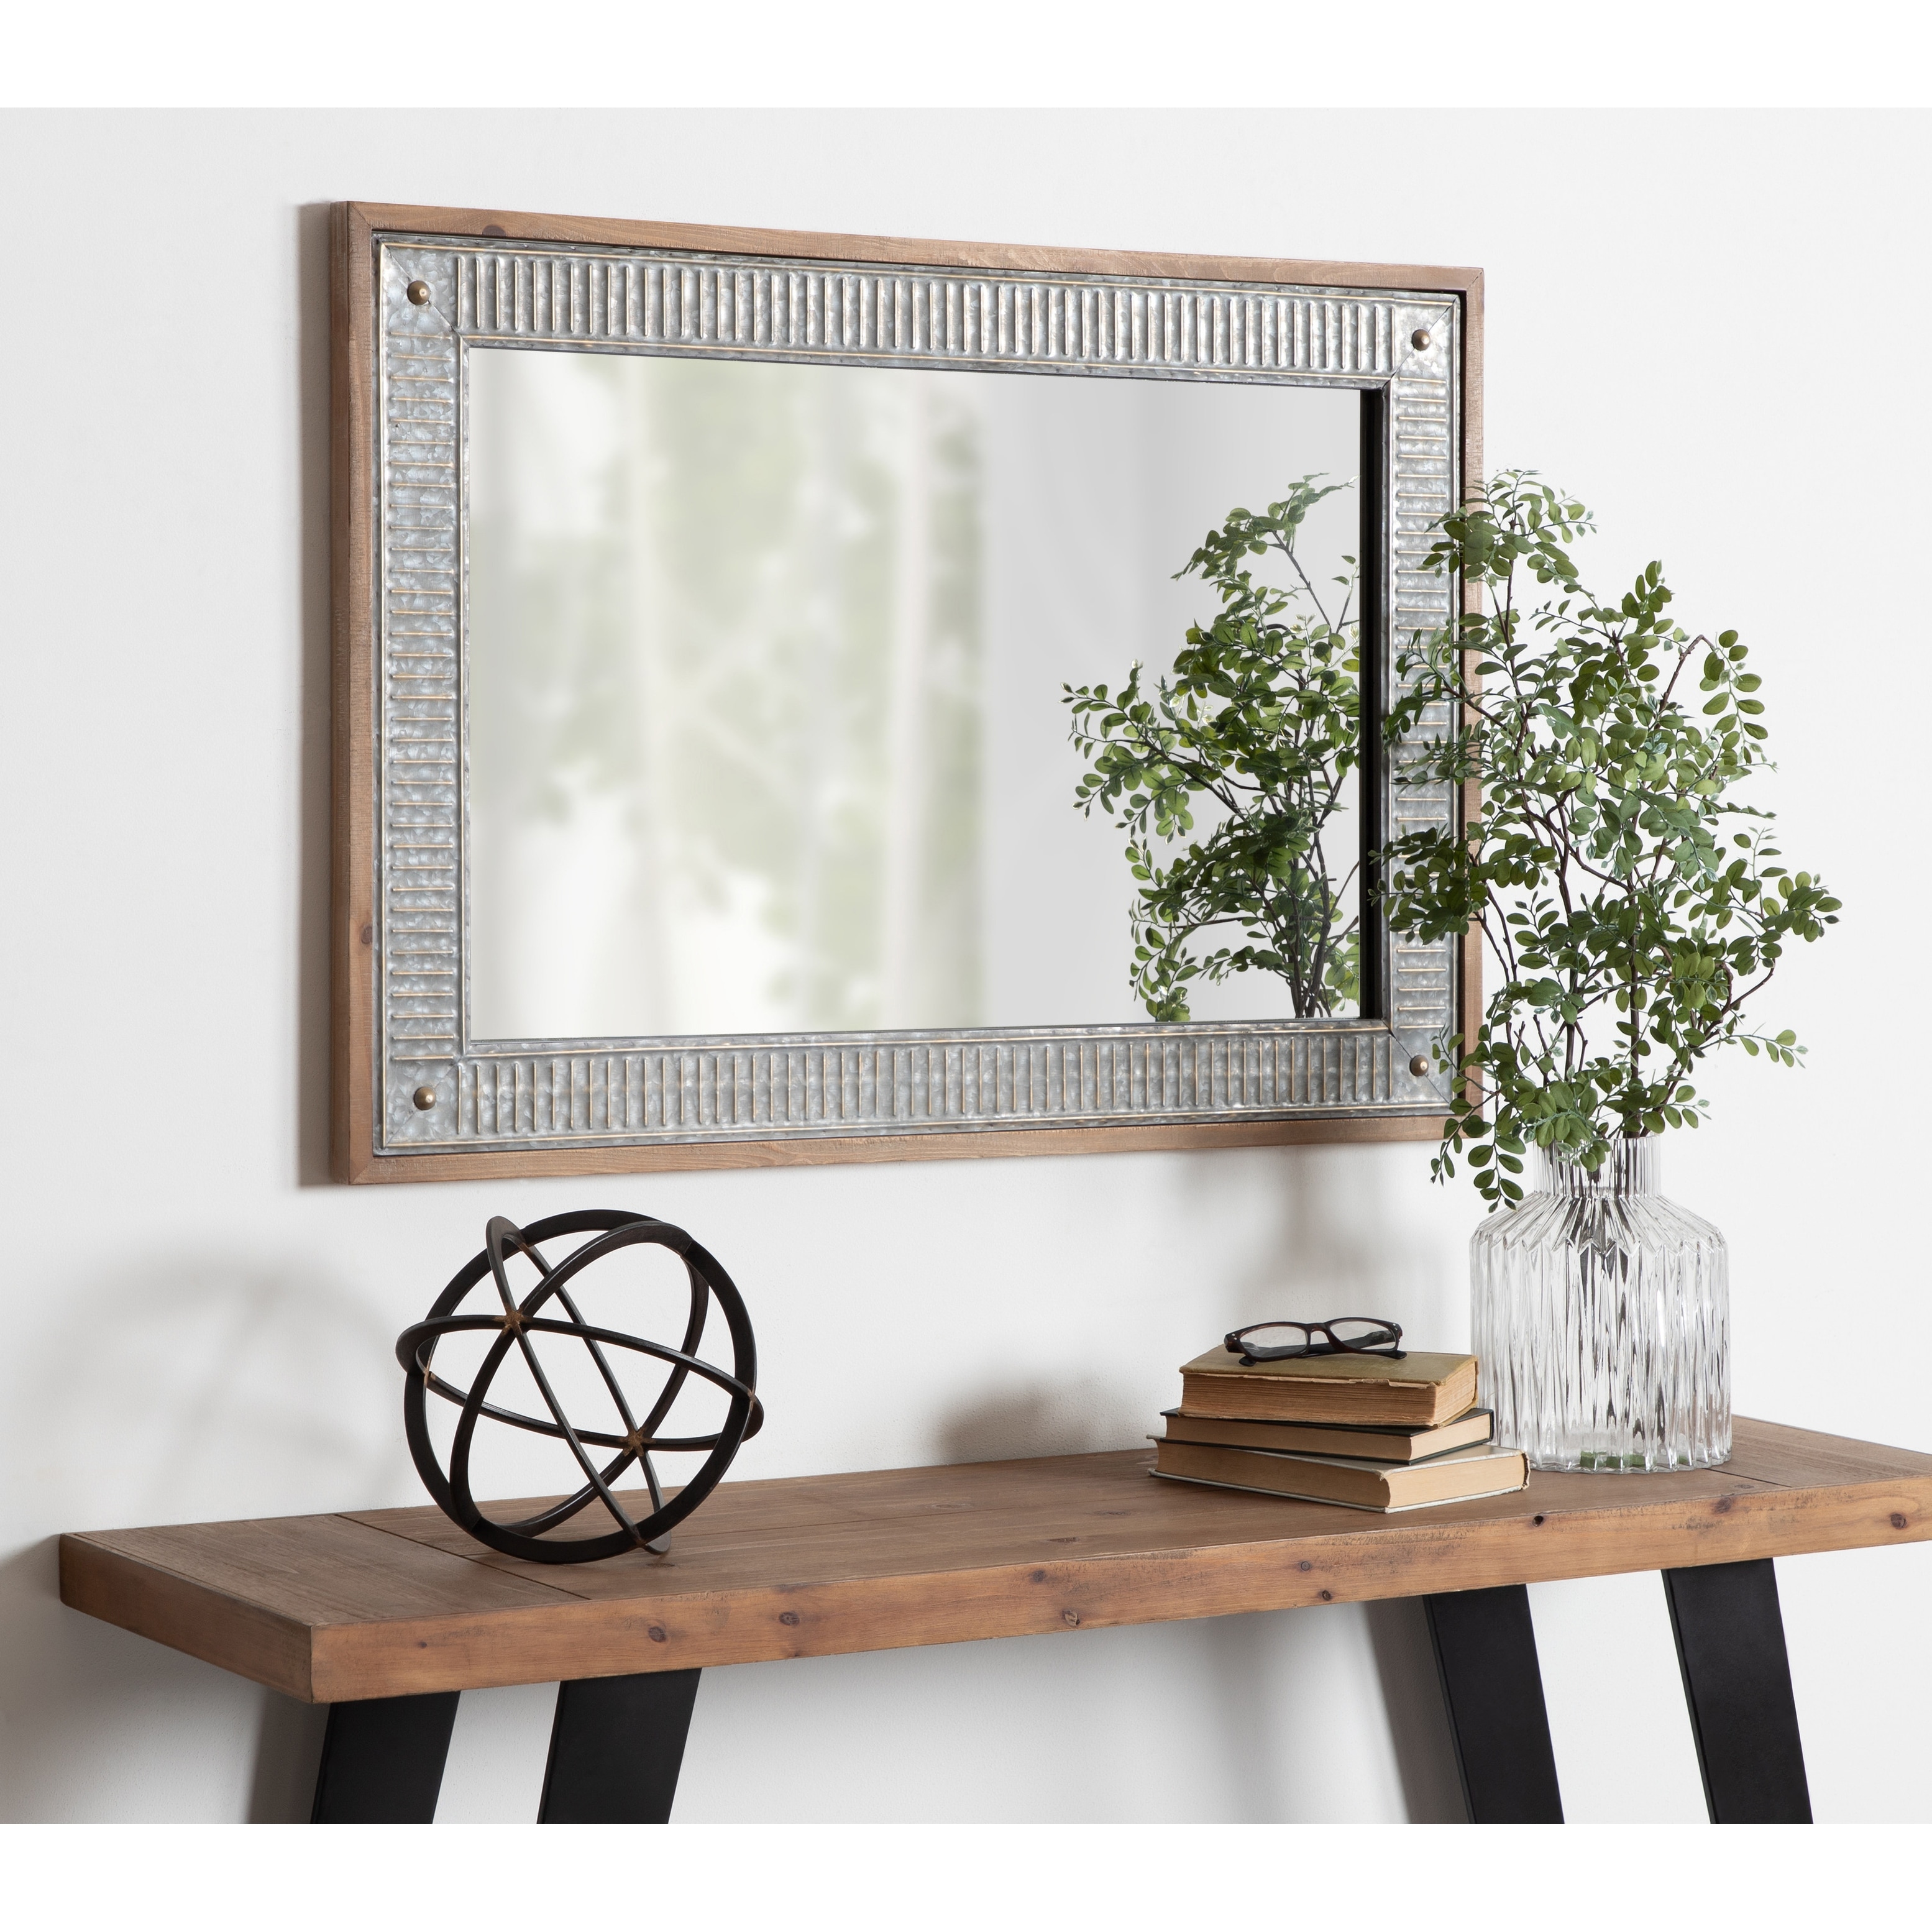 Kate and Laurel Deely Wood and Metal Wall Mirror On Sale Bed Bath   Beyond 26970997